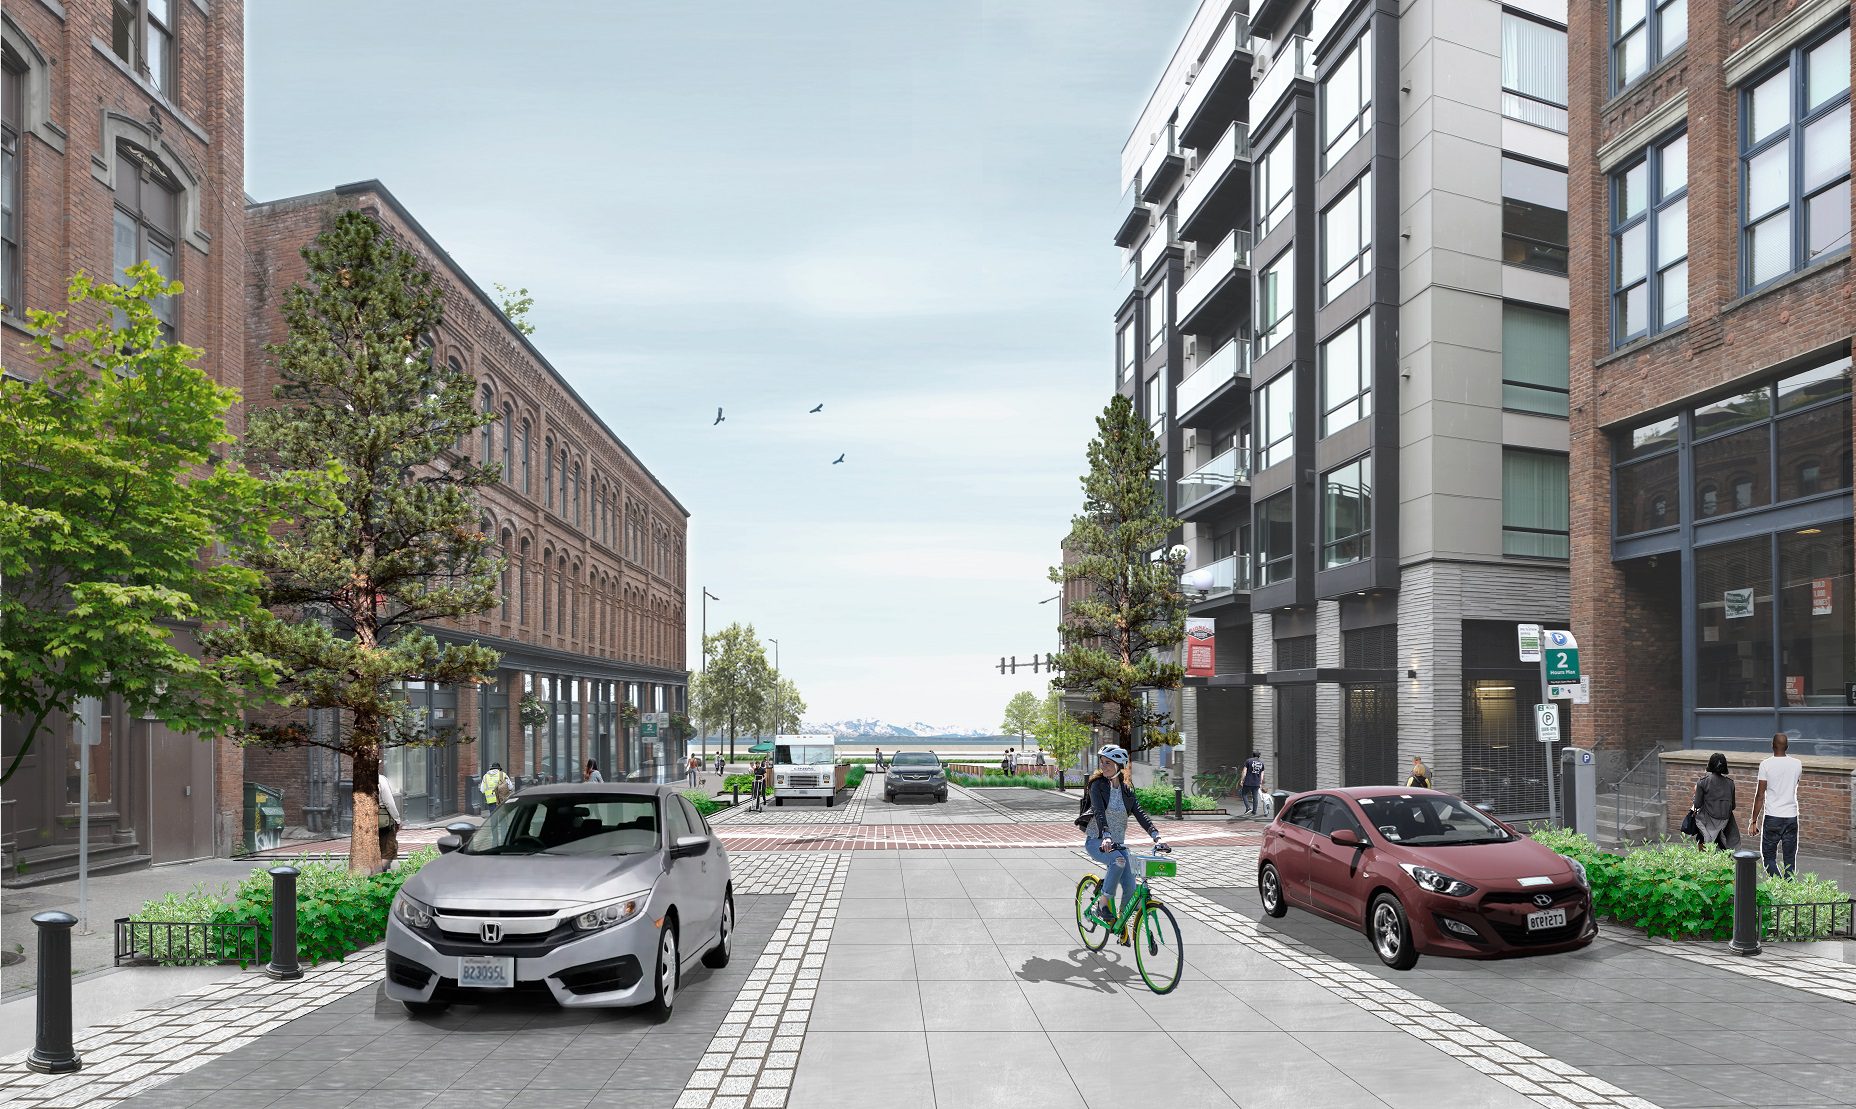 Rendering of a cityscape with large buildings, a person biking, trees, and parked cars on a partly sunny day.